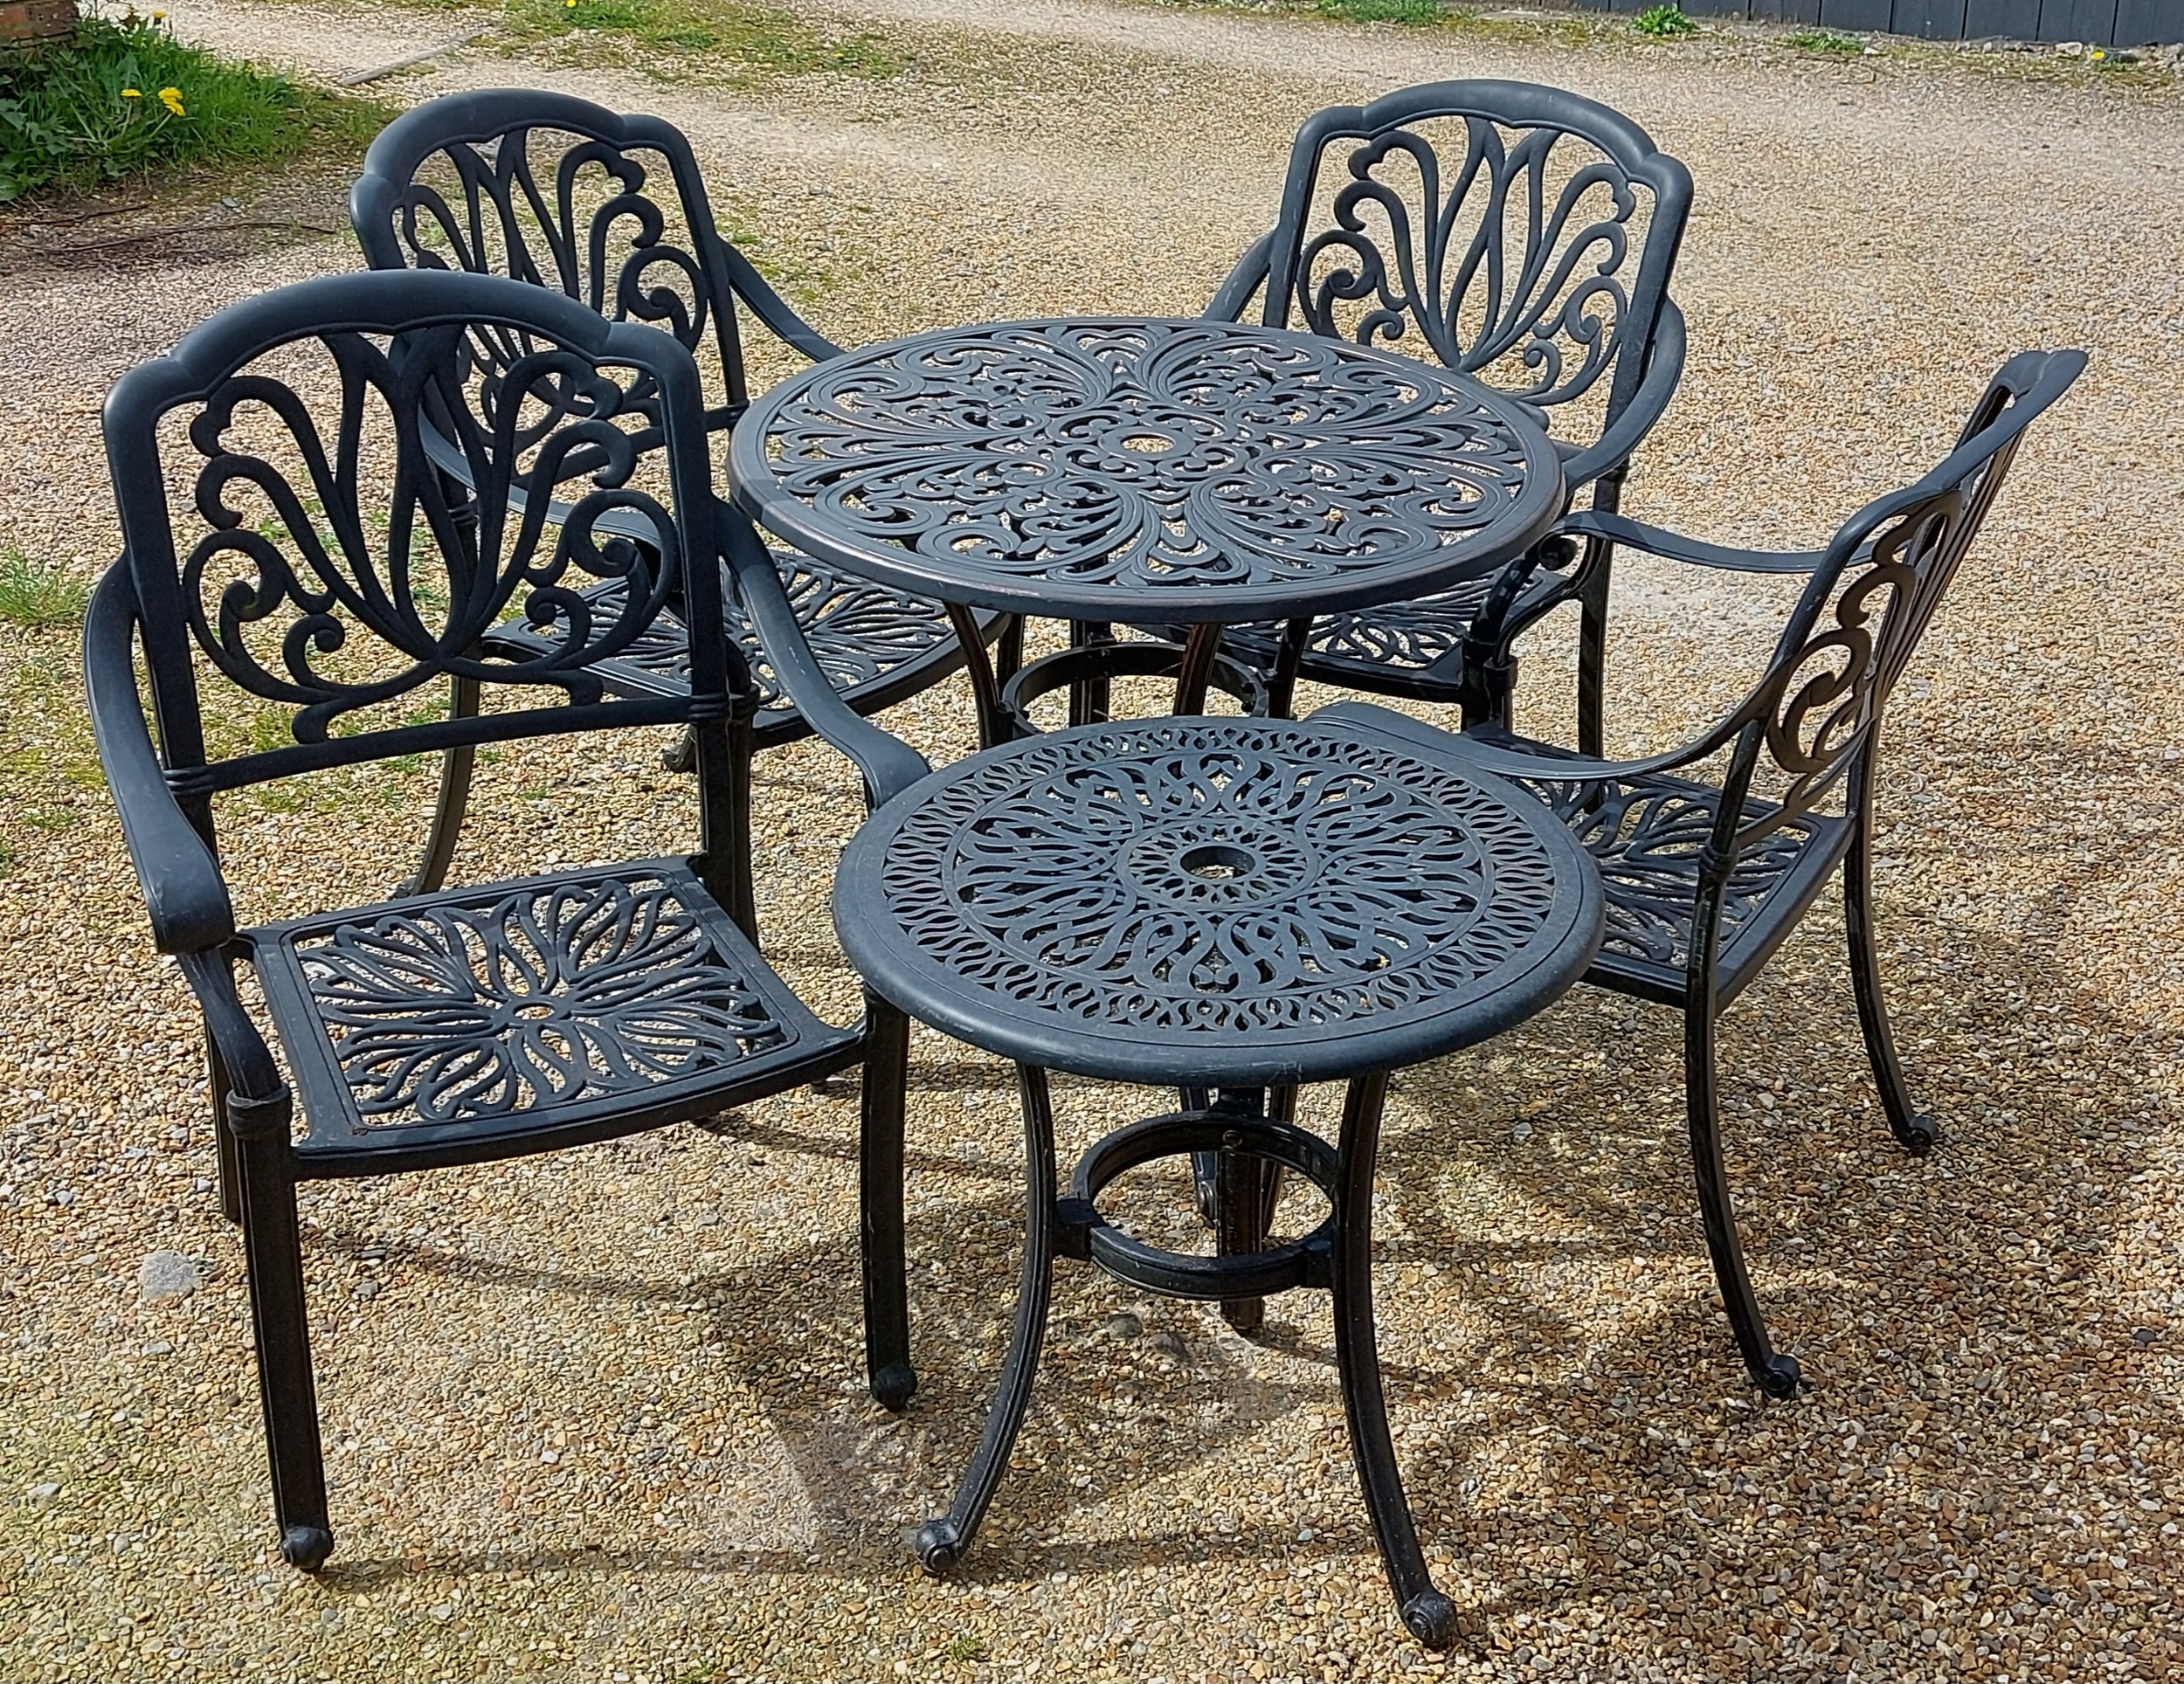 An aluminium garden table together with a set of four matching chairs and another smaller garden